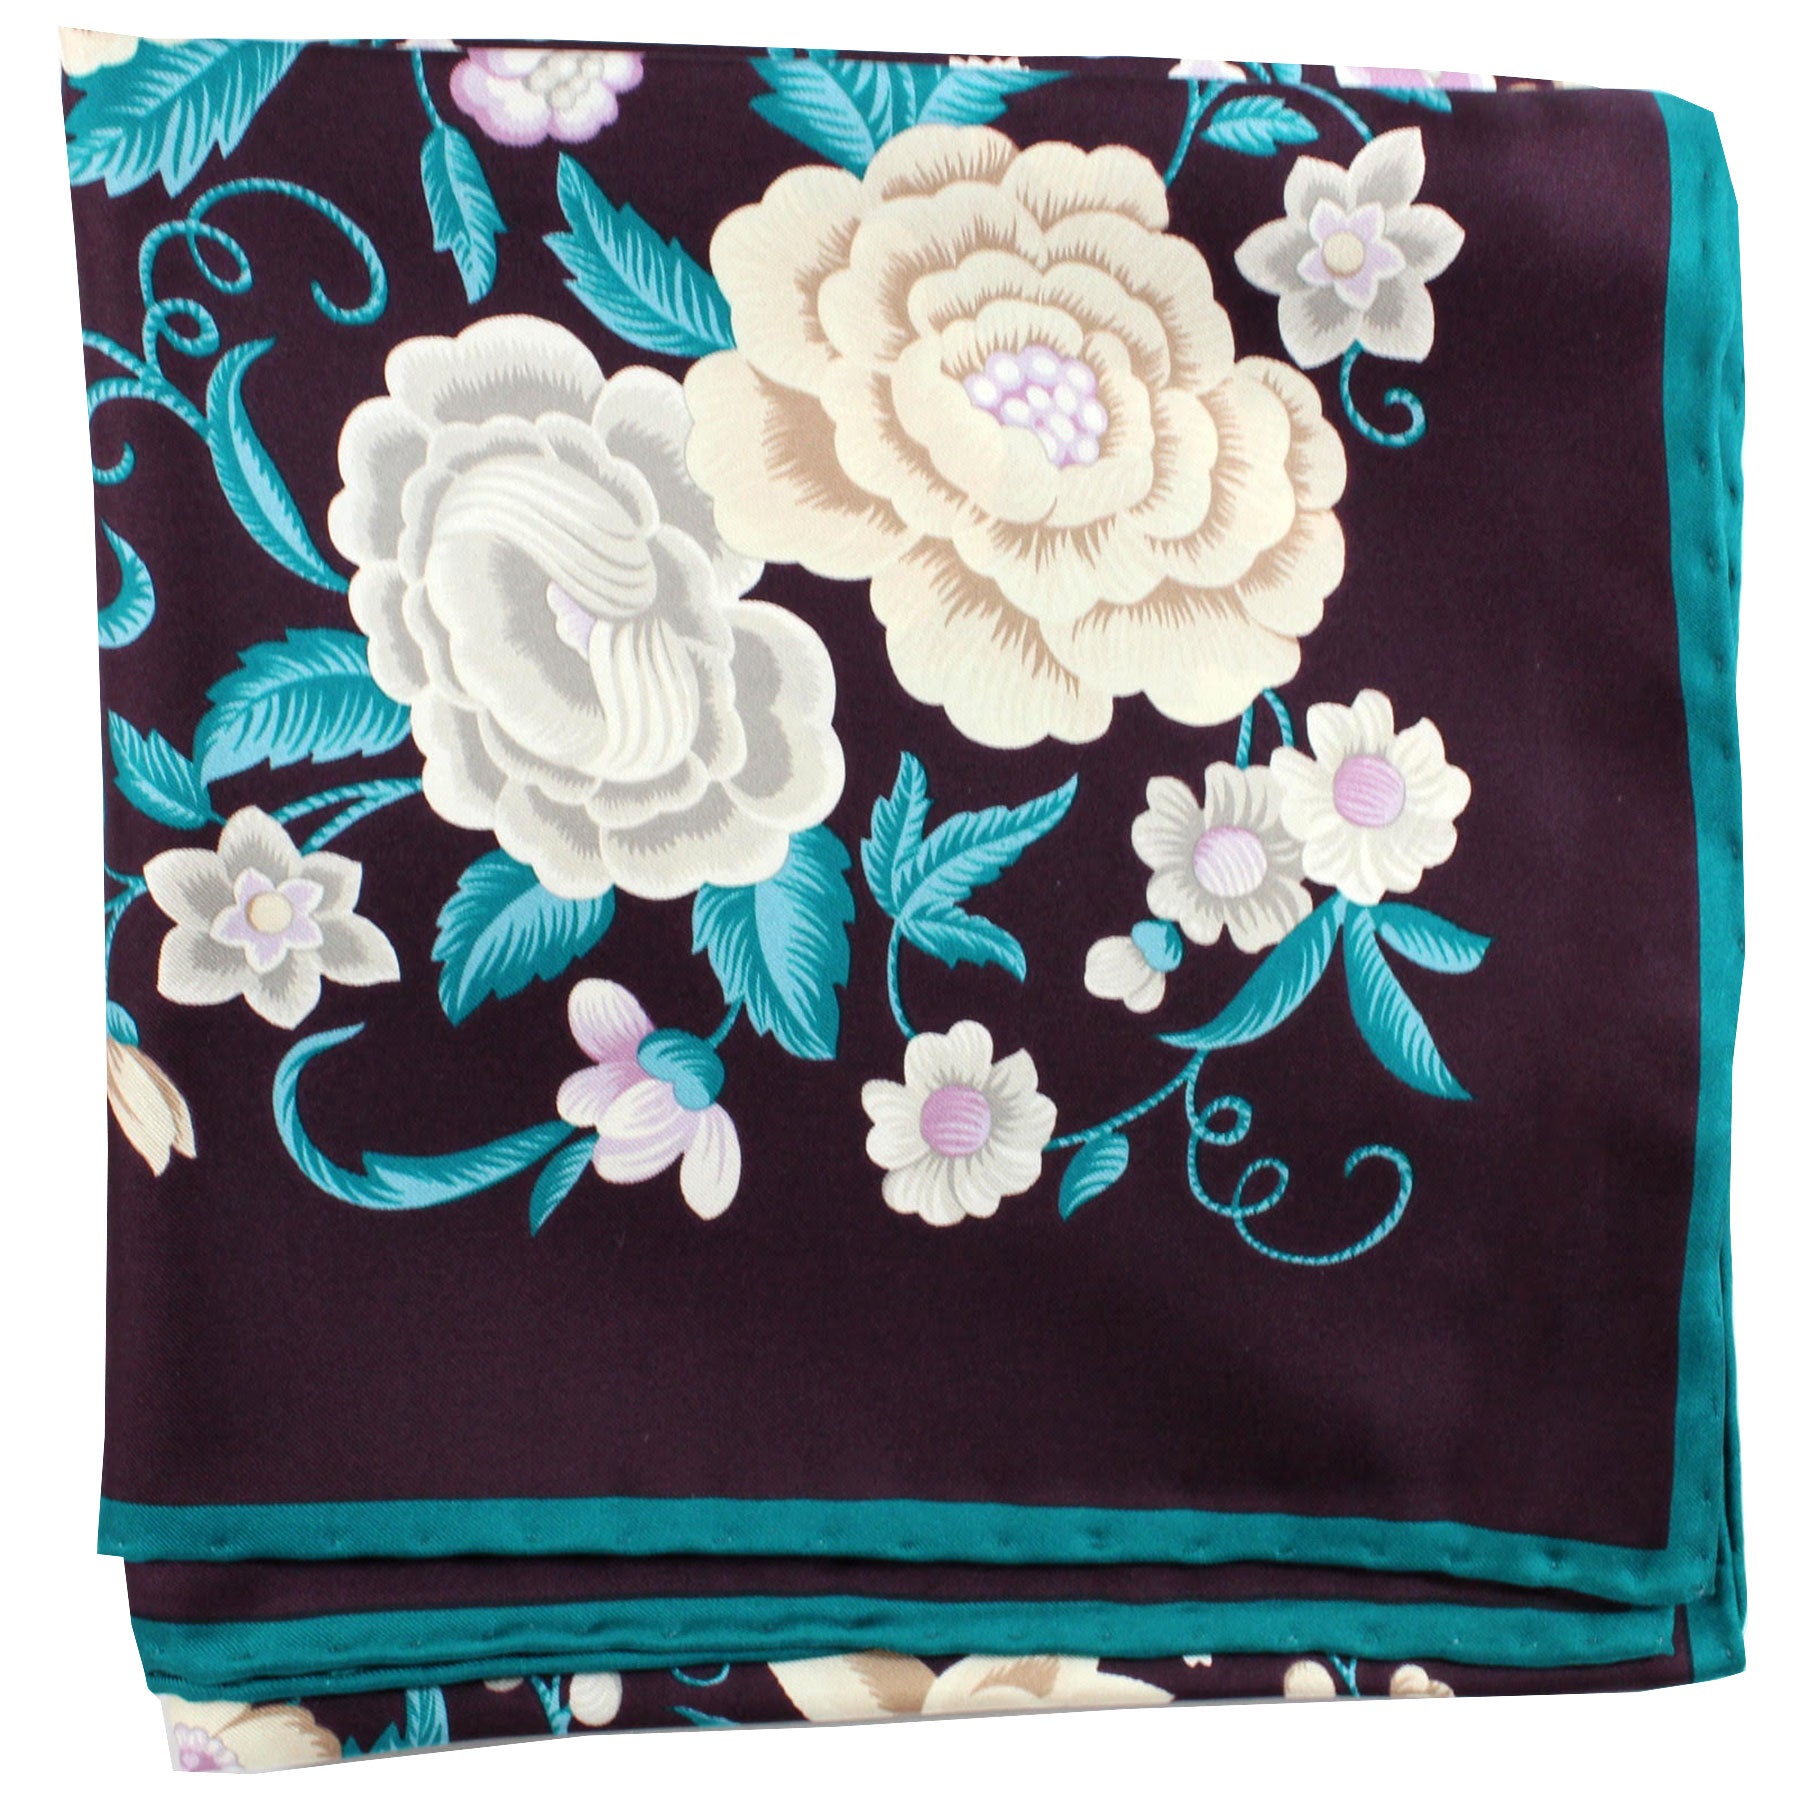 Loewe Scarf Black Turquoise Floral - Large 36 Inch Square Silk Scarf